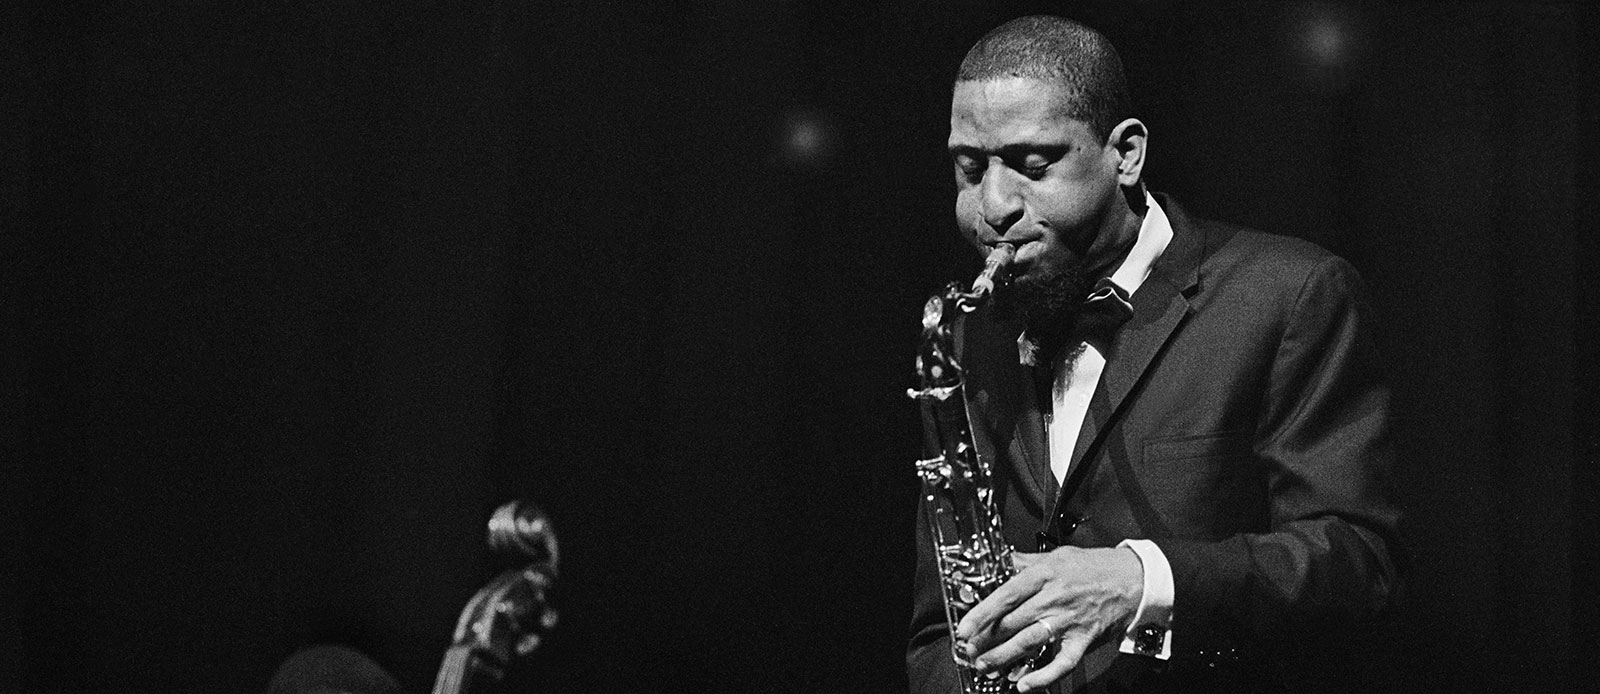 Saxophone Colossus : the life and music of Sonny Rollins